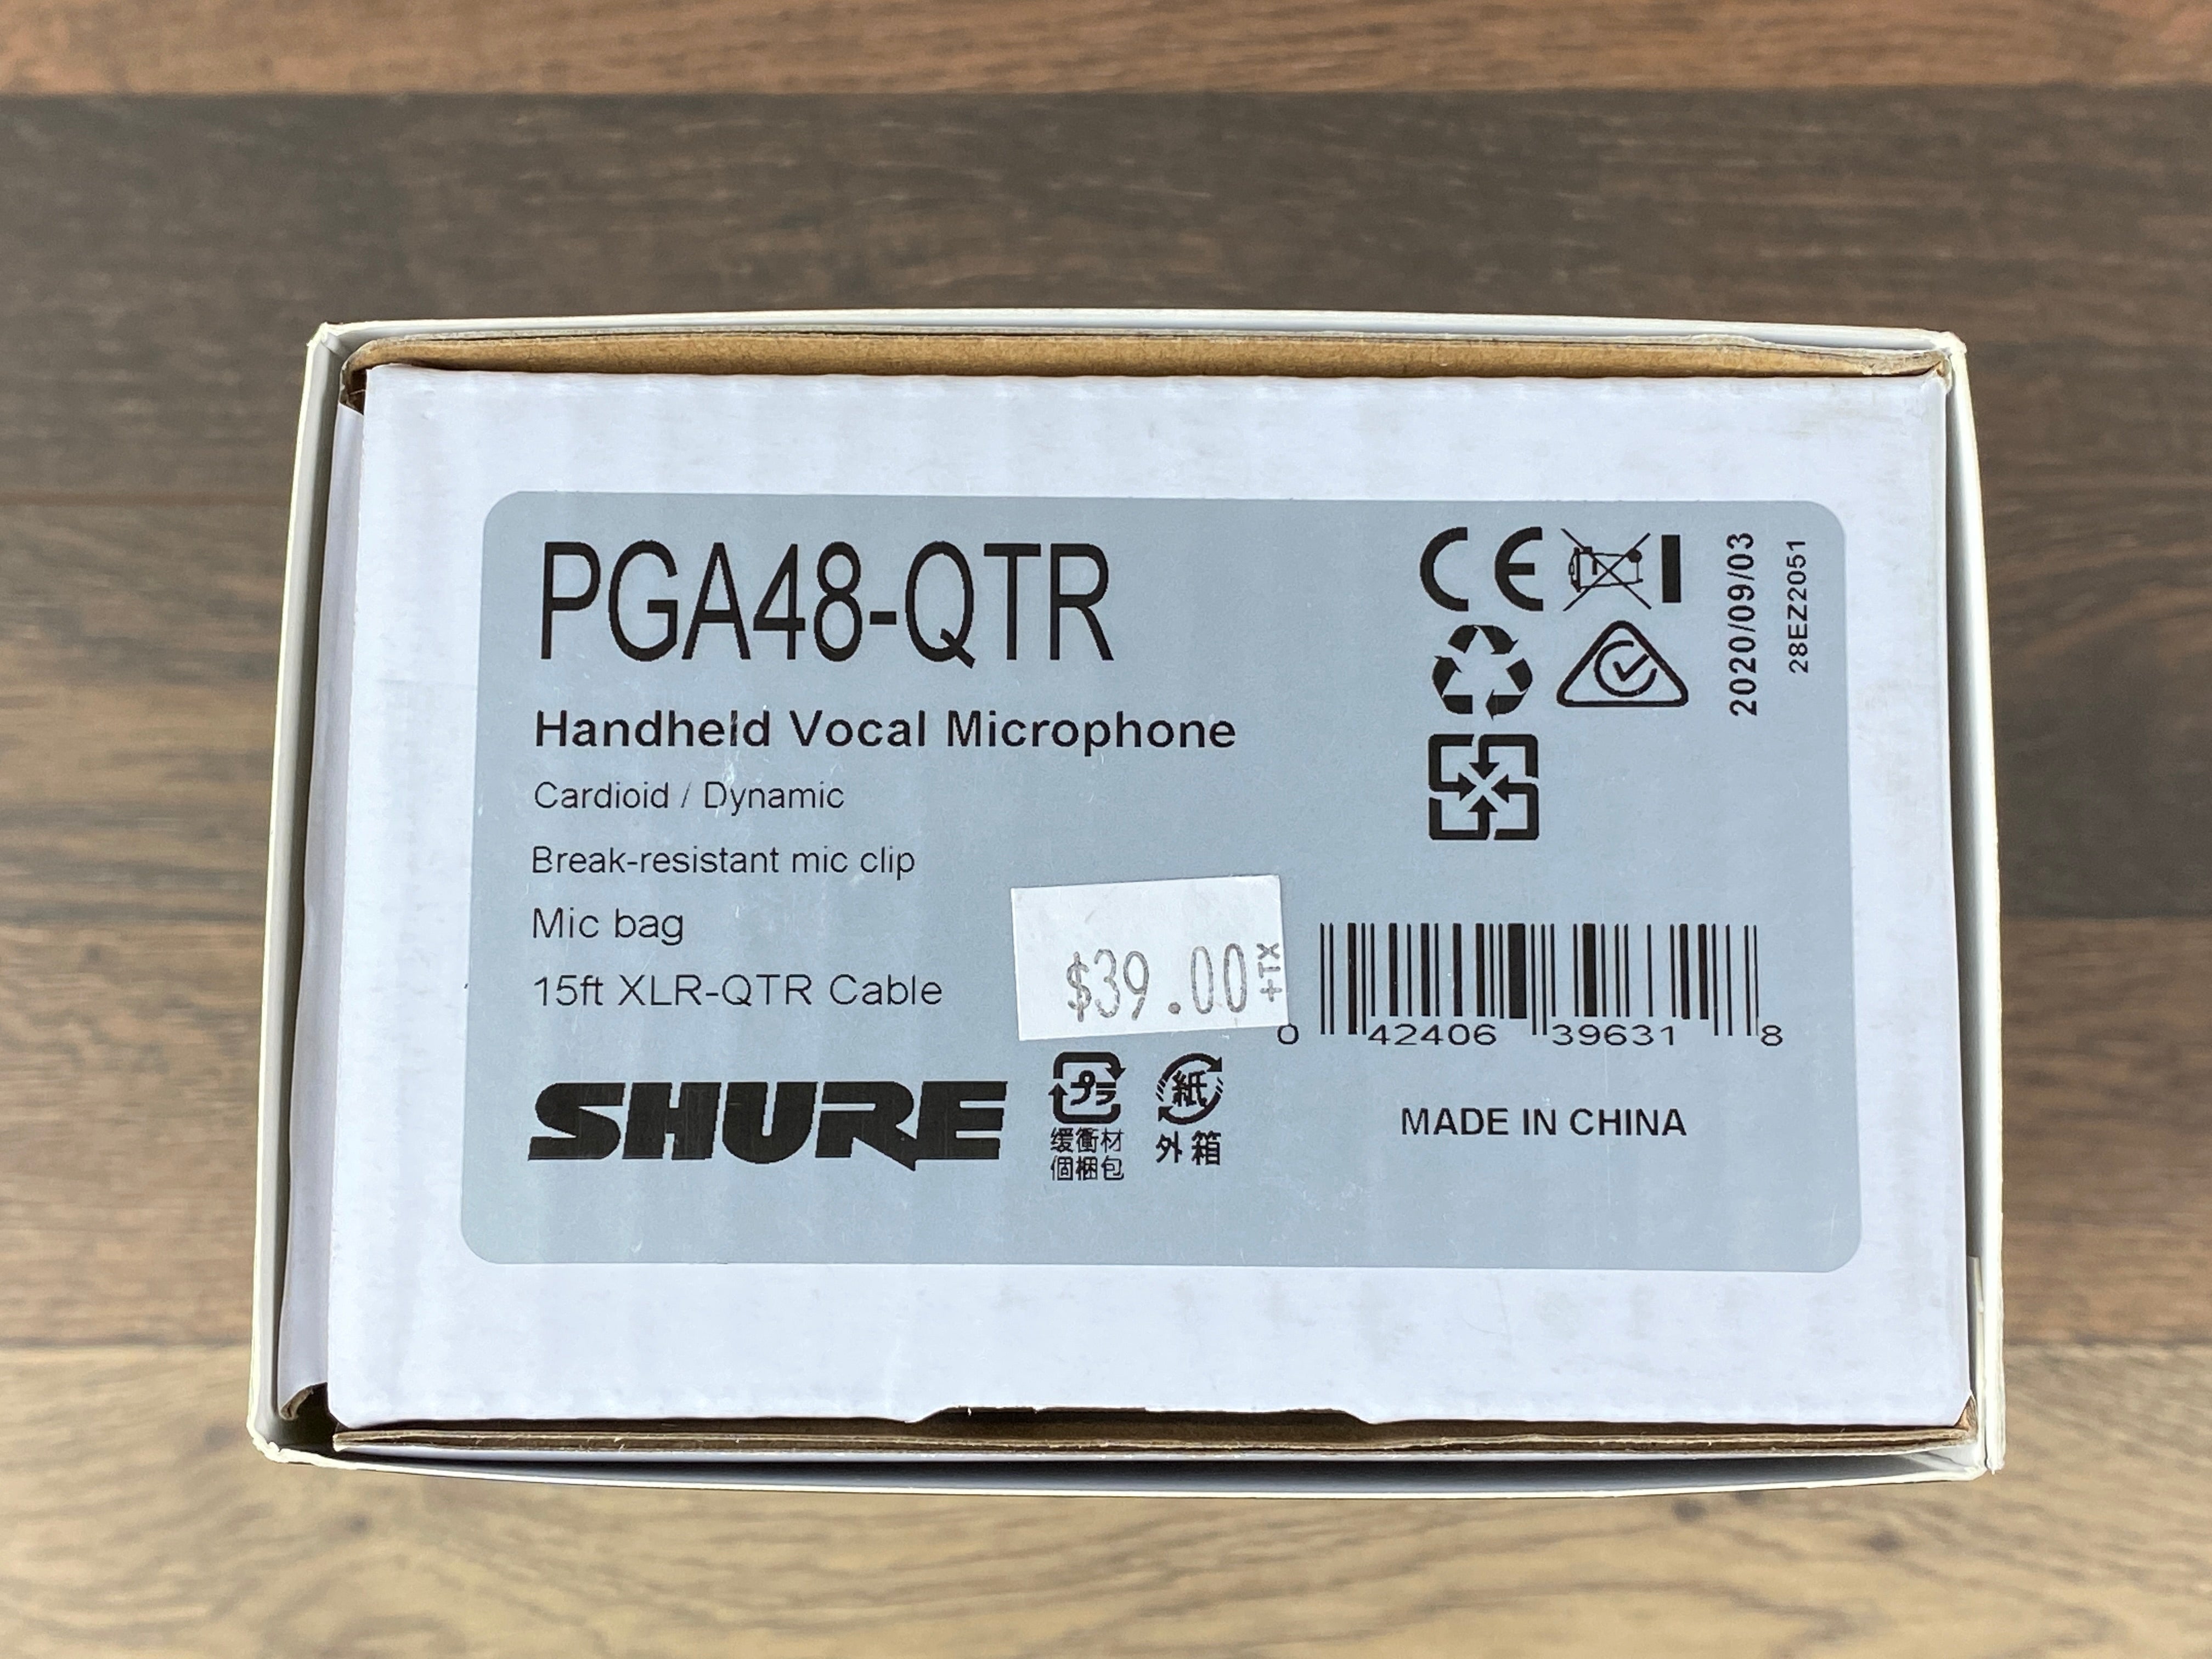 Shure PGA48-QTR Cardioid Dynamic Vocal Microphone with 15ft. XLR-QTR(1/4") Cable